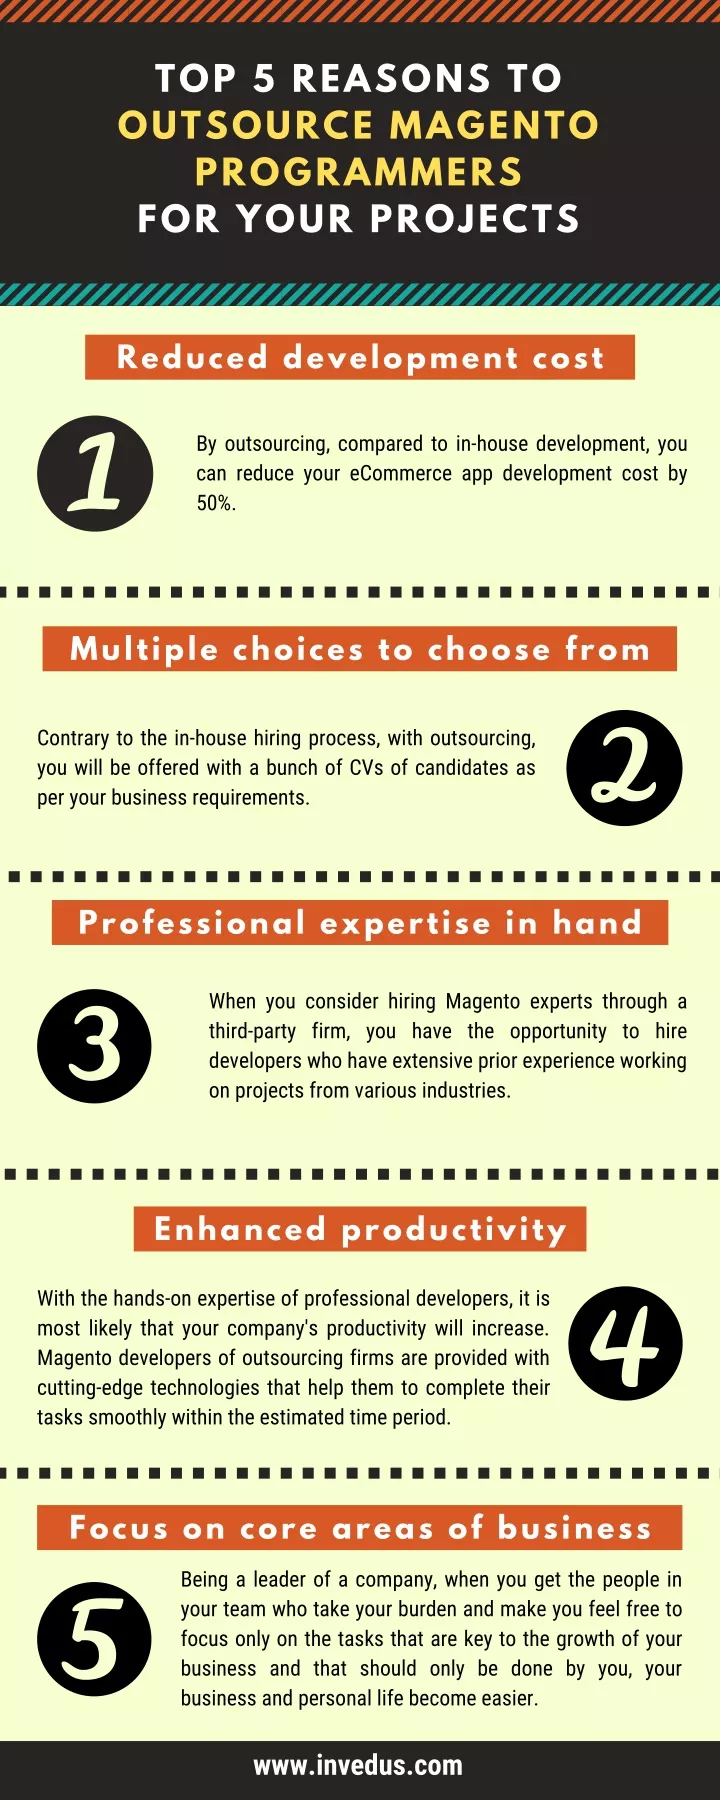 top 5 reasons to outsource magento programmers